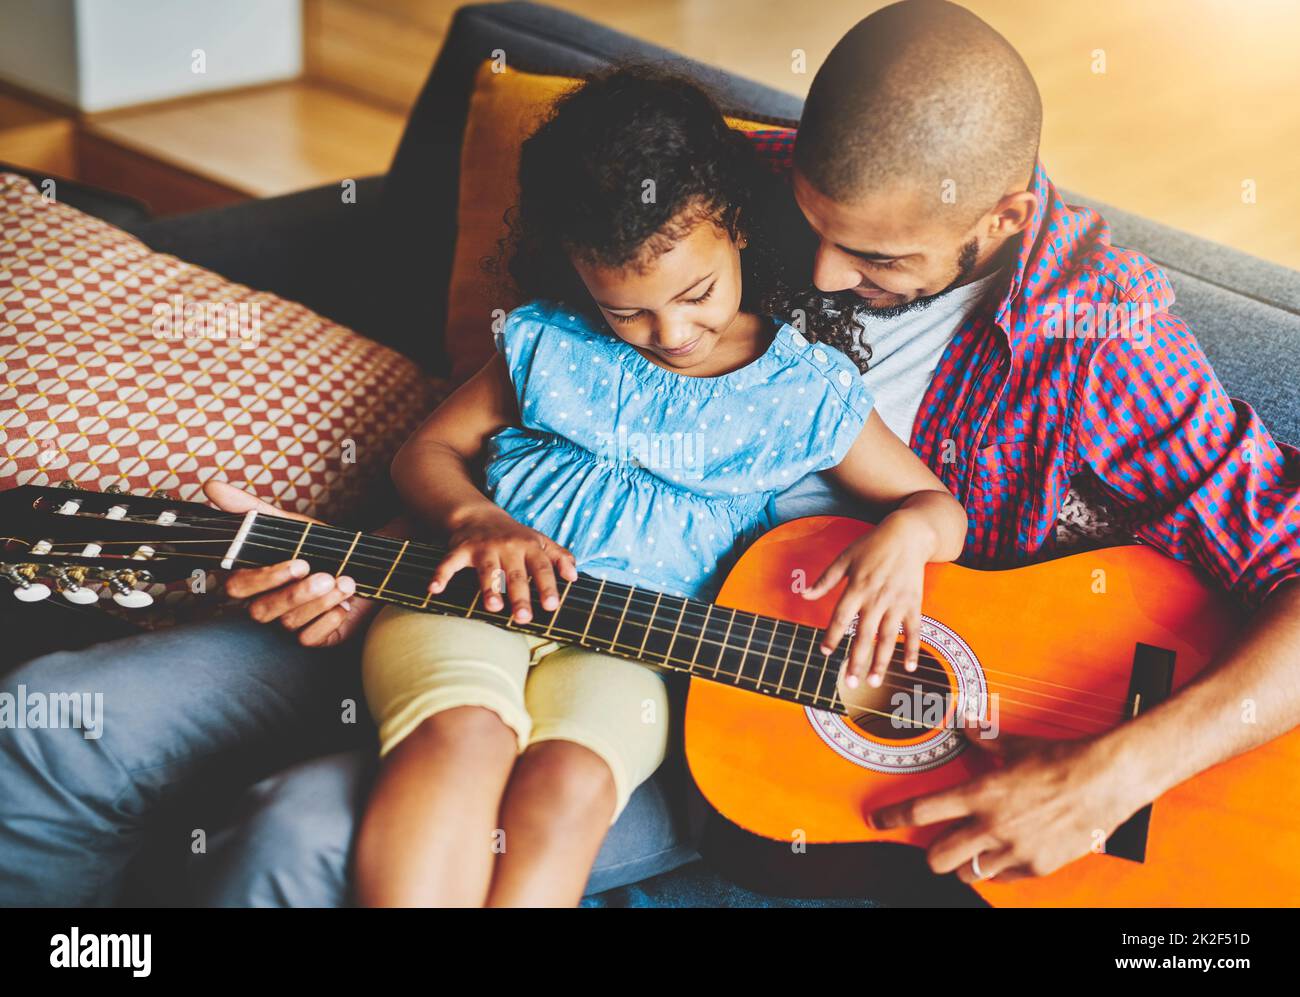 To share music is to share love. Shot of an adorable little girl and her father playing a guitar together on the sofa at home. Stock Photo